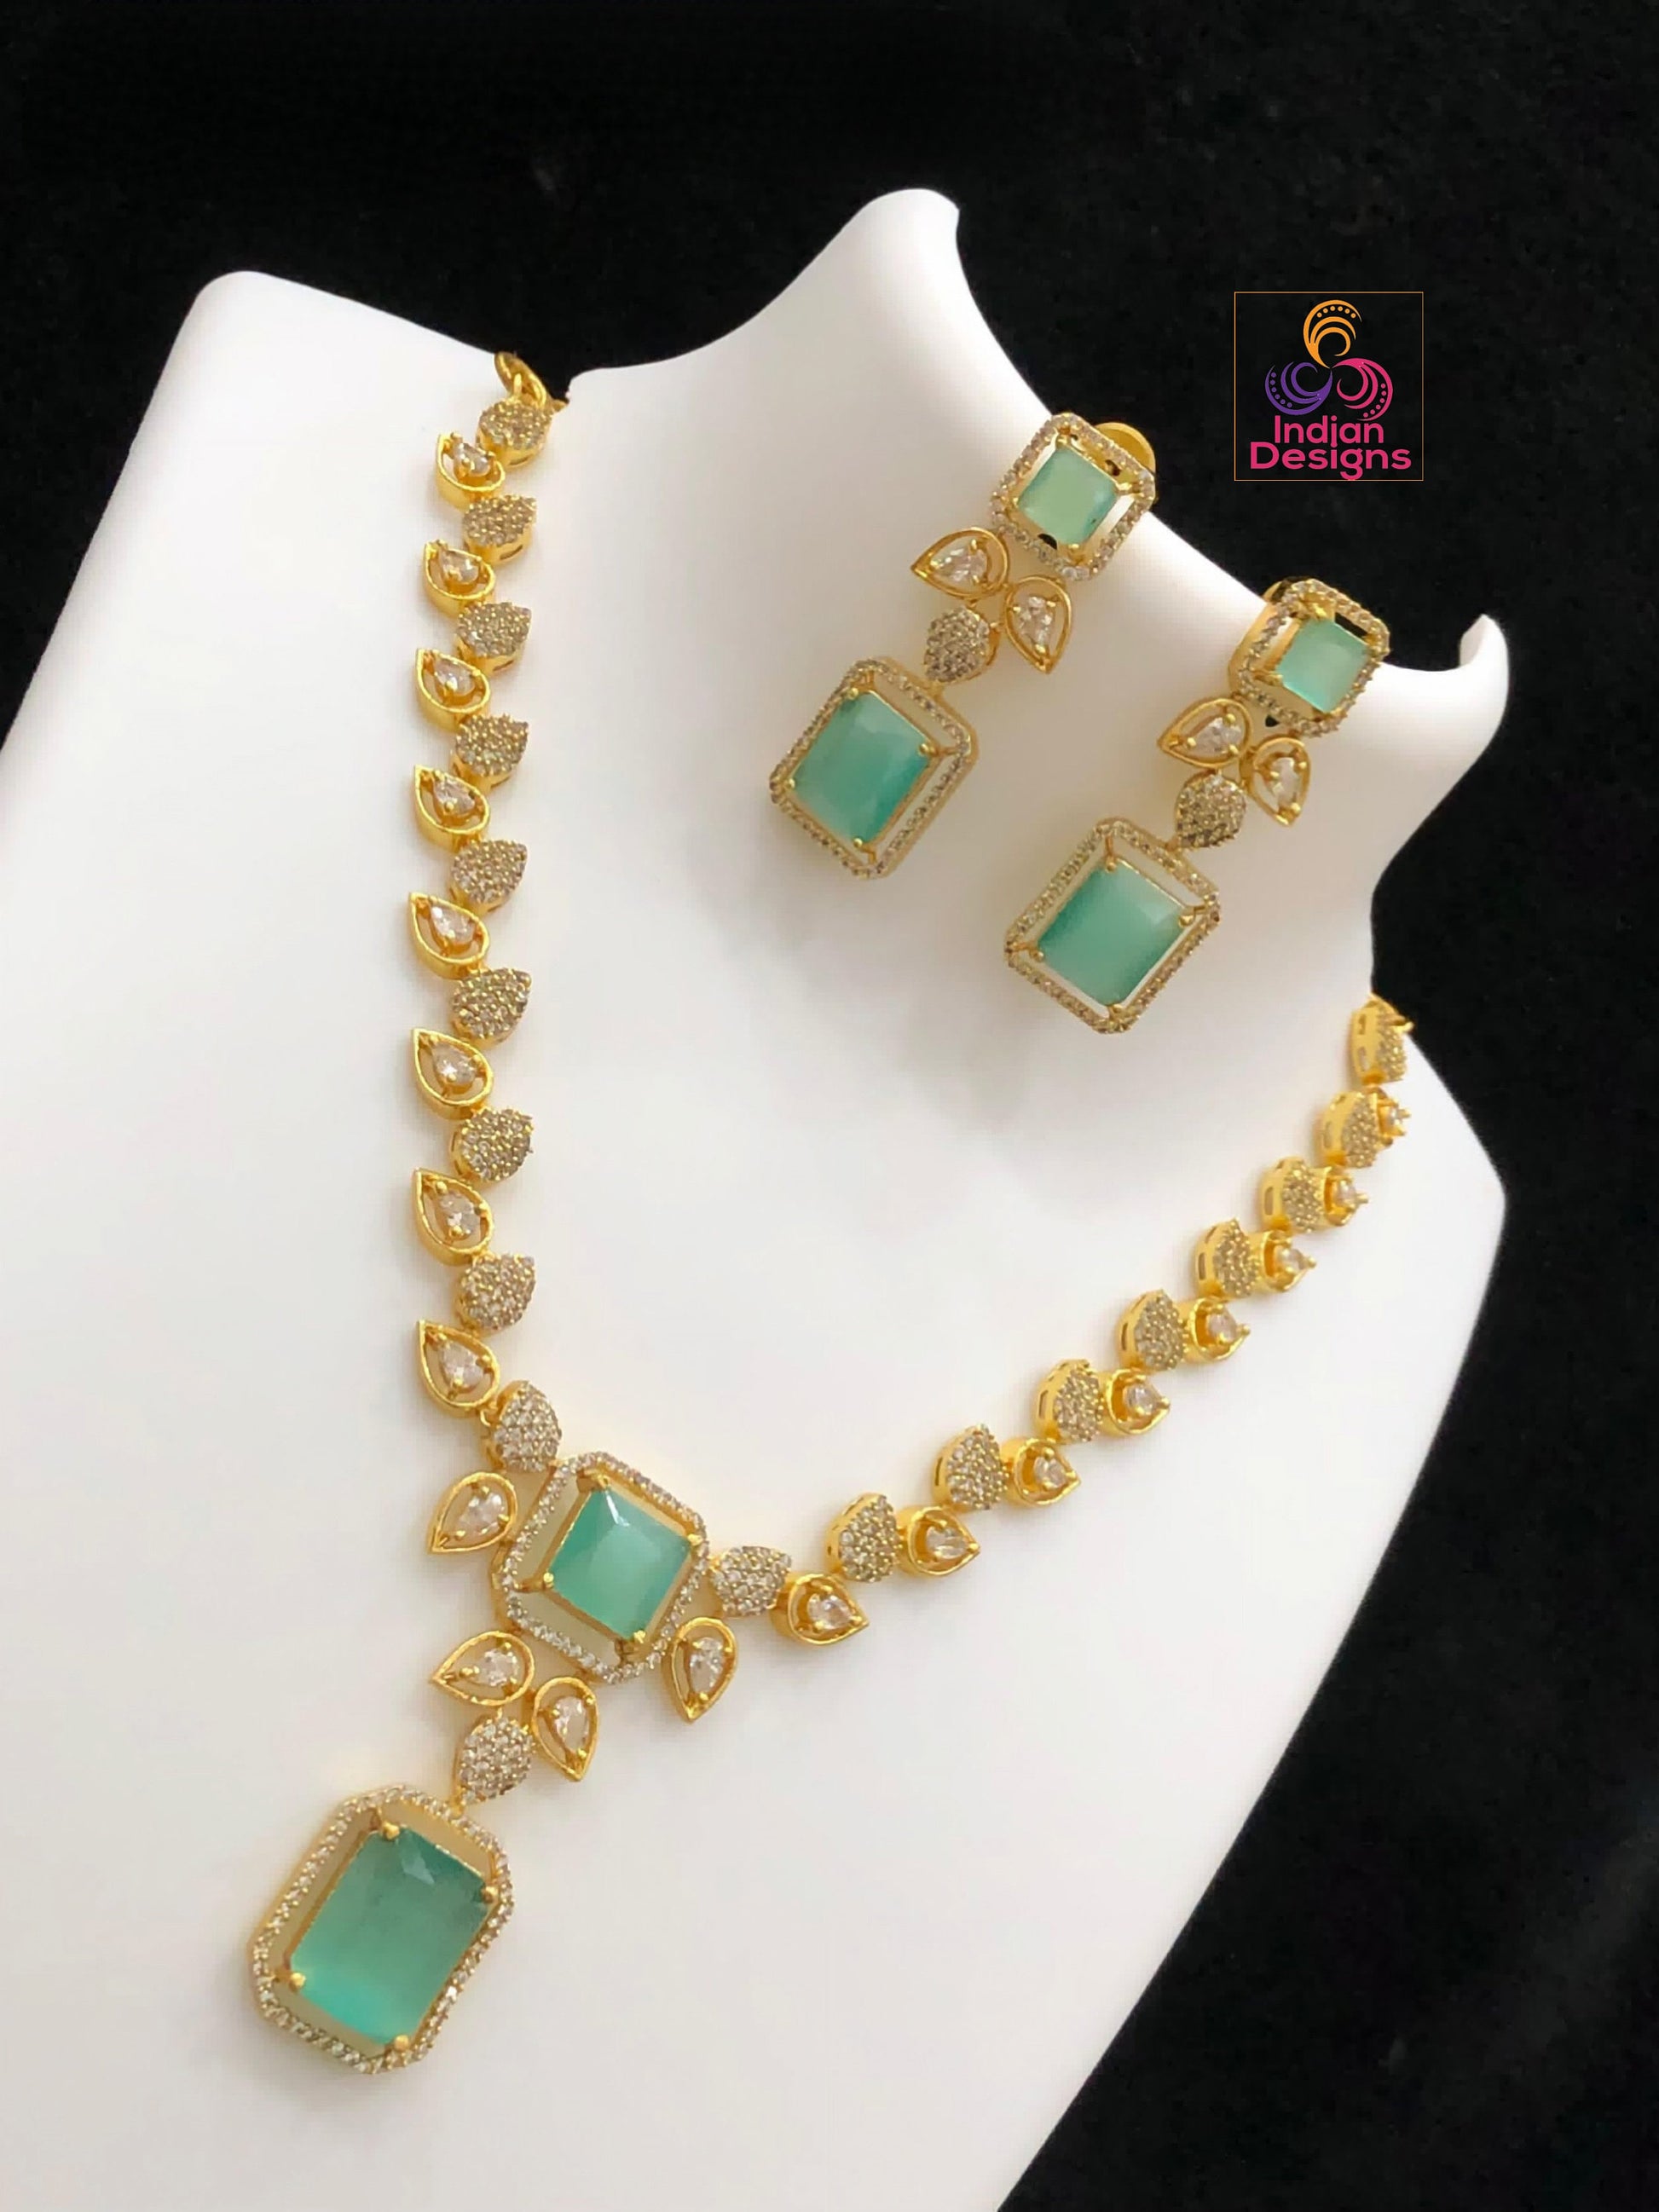 Gold Plated Necklace and Earrings Set with American Diamond Mint Green - Luxurious Teardrop and Square Gemstone Jewelry Set| Gift For Her